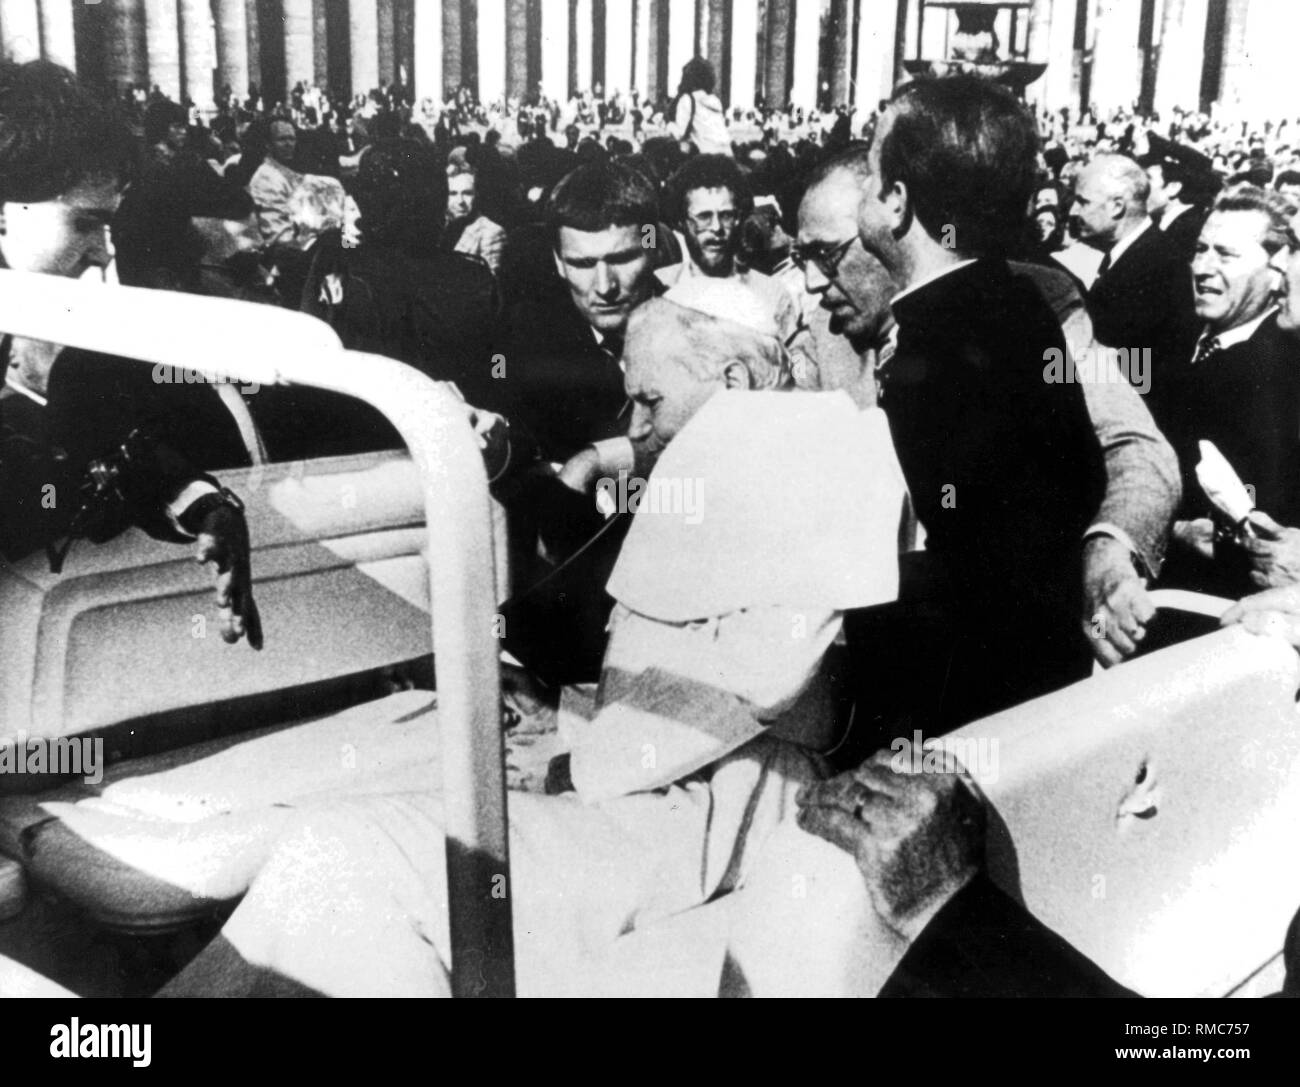 The Turkish assassin Ali Agca shot the Pope with a pistol and injured ...